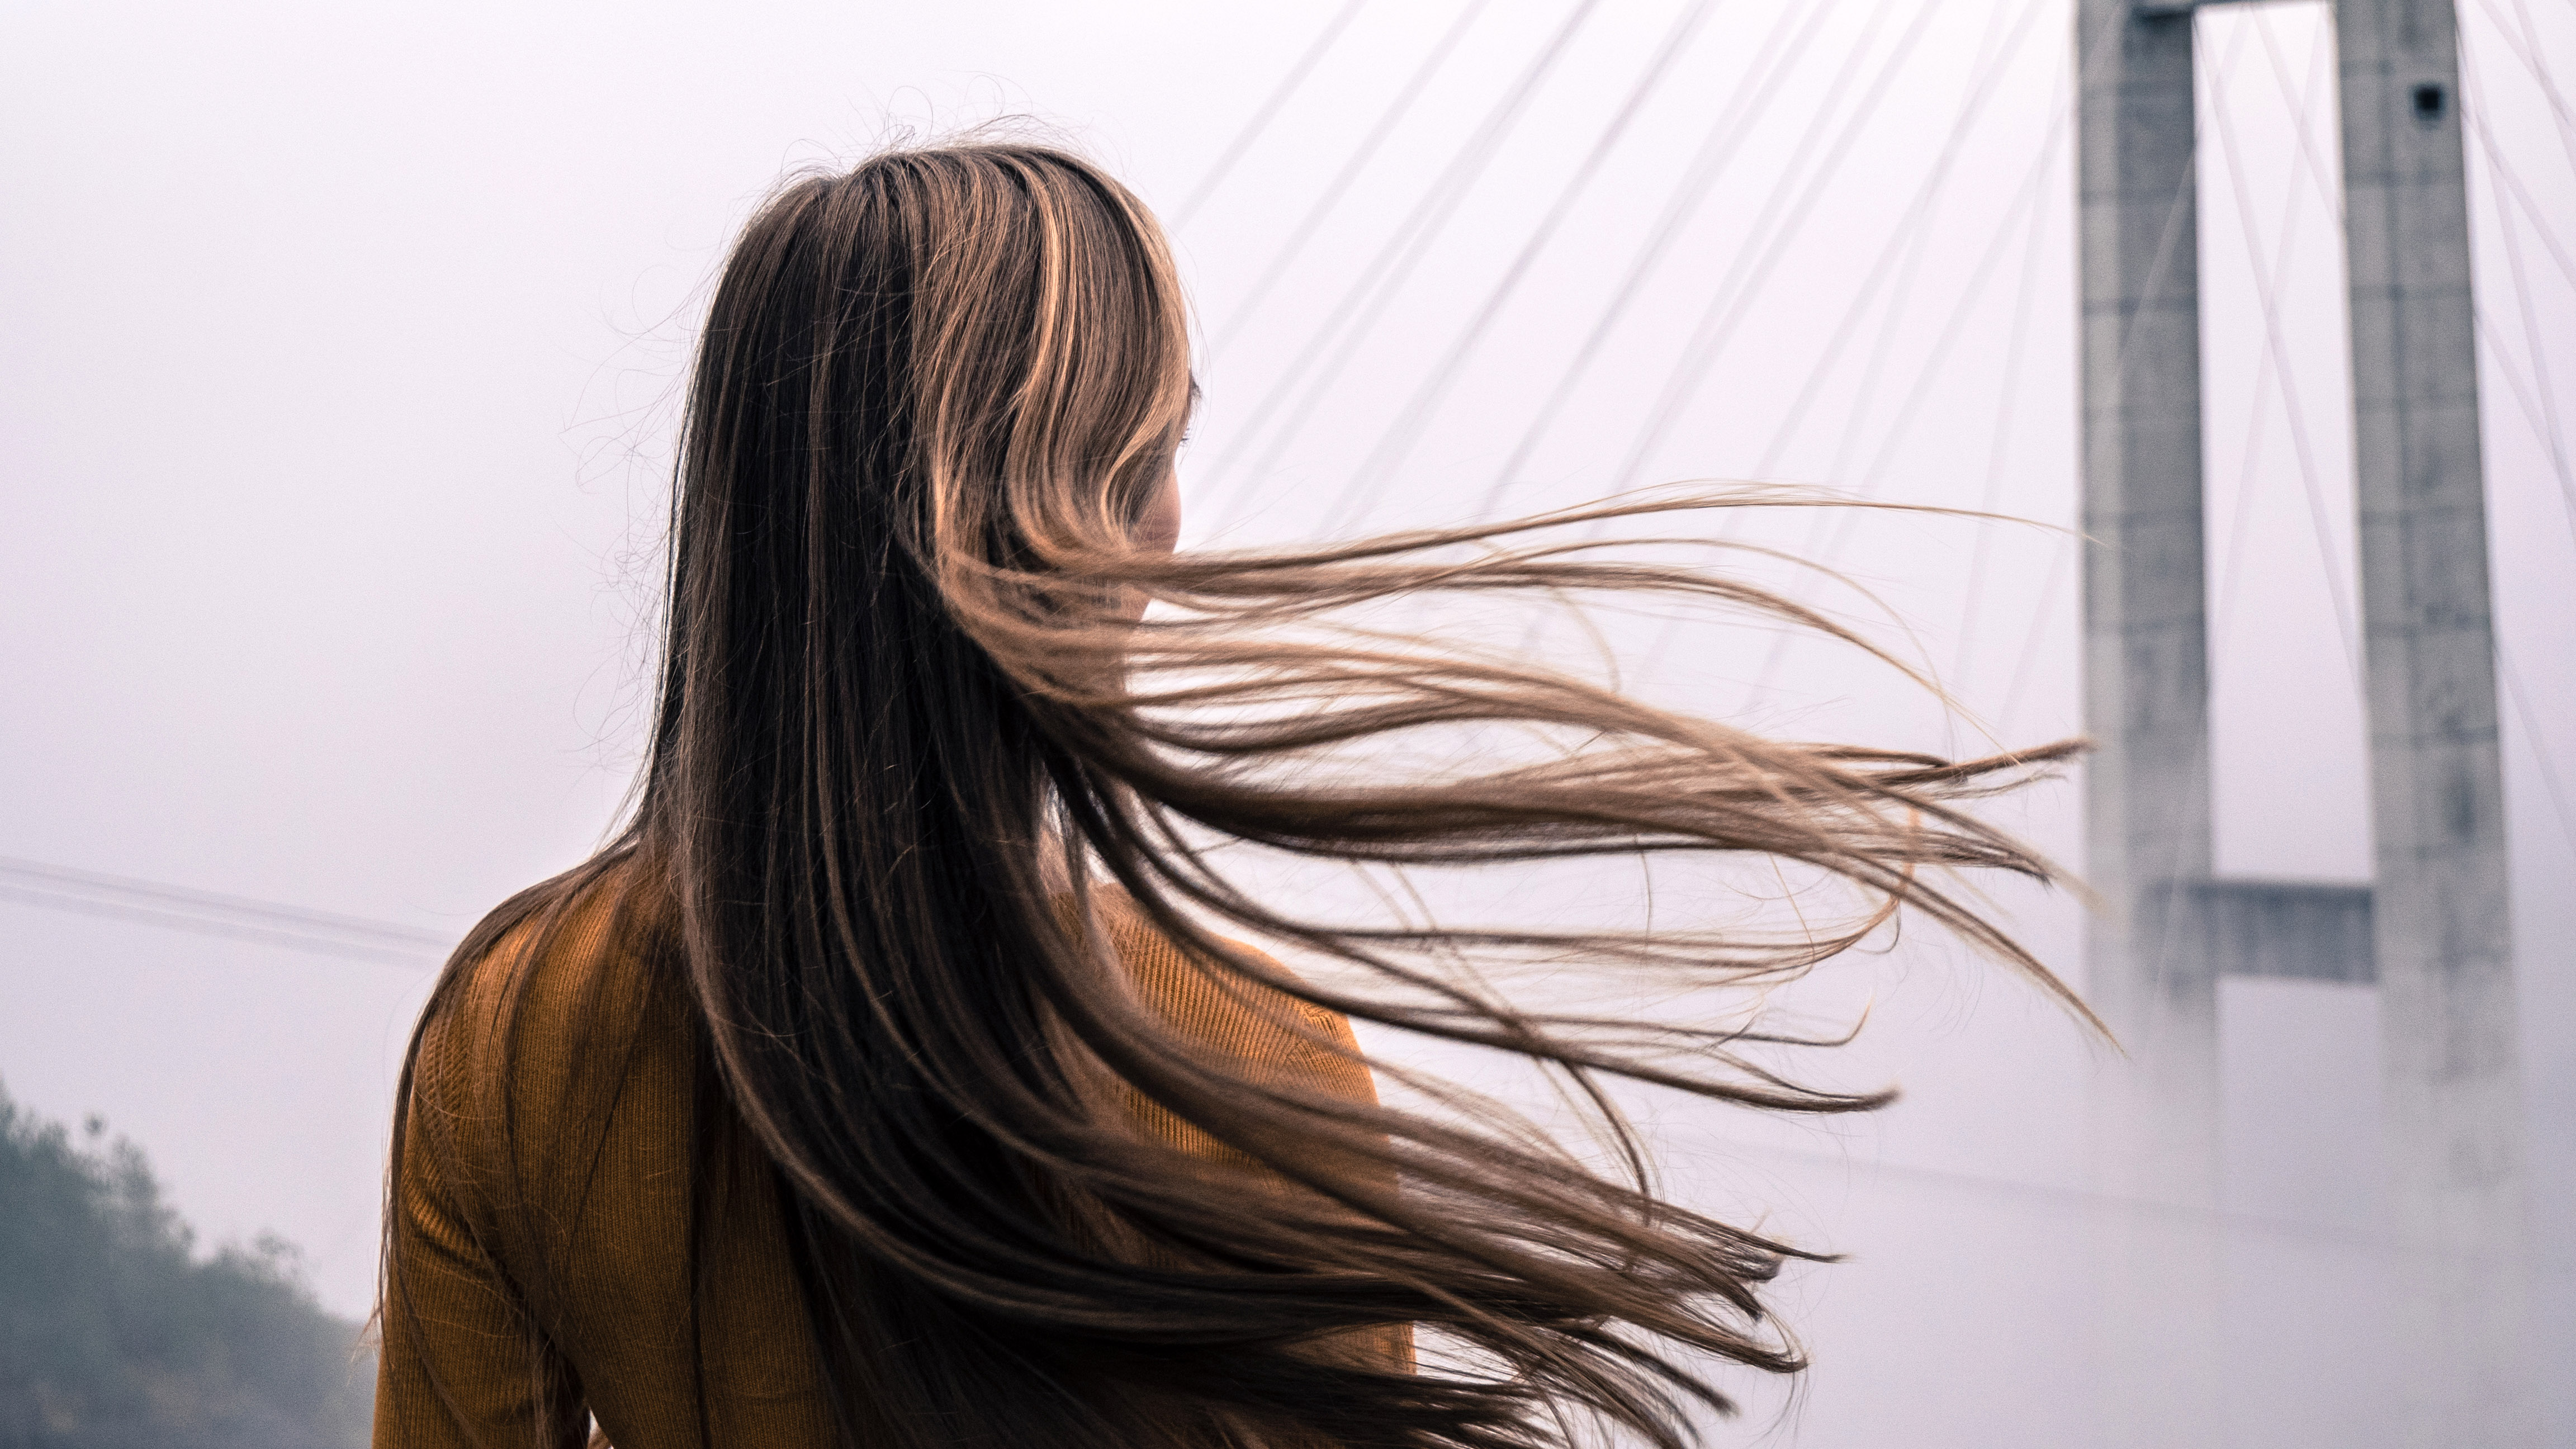 girl-with-hair-blowing-in-the-wind-image-free-stock-photo-public